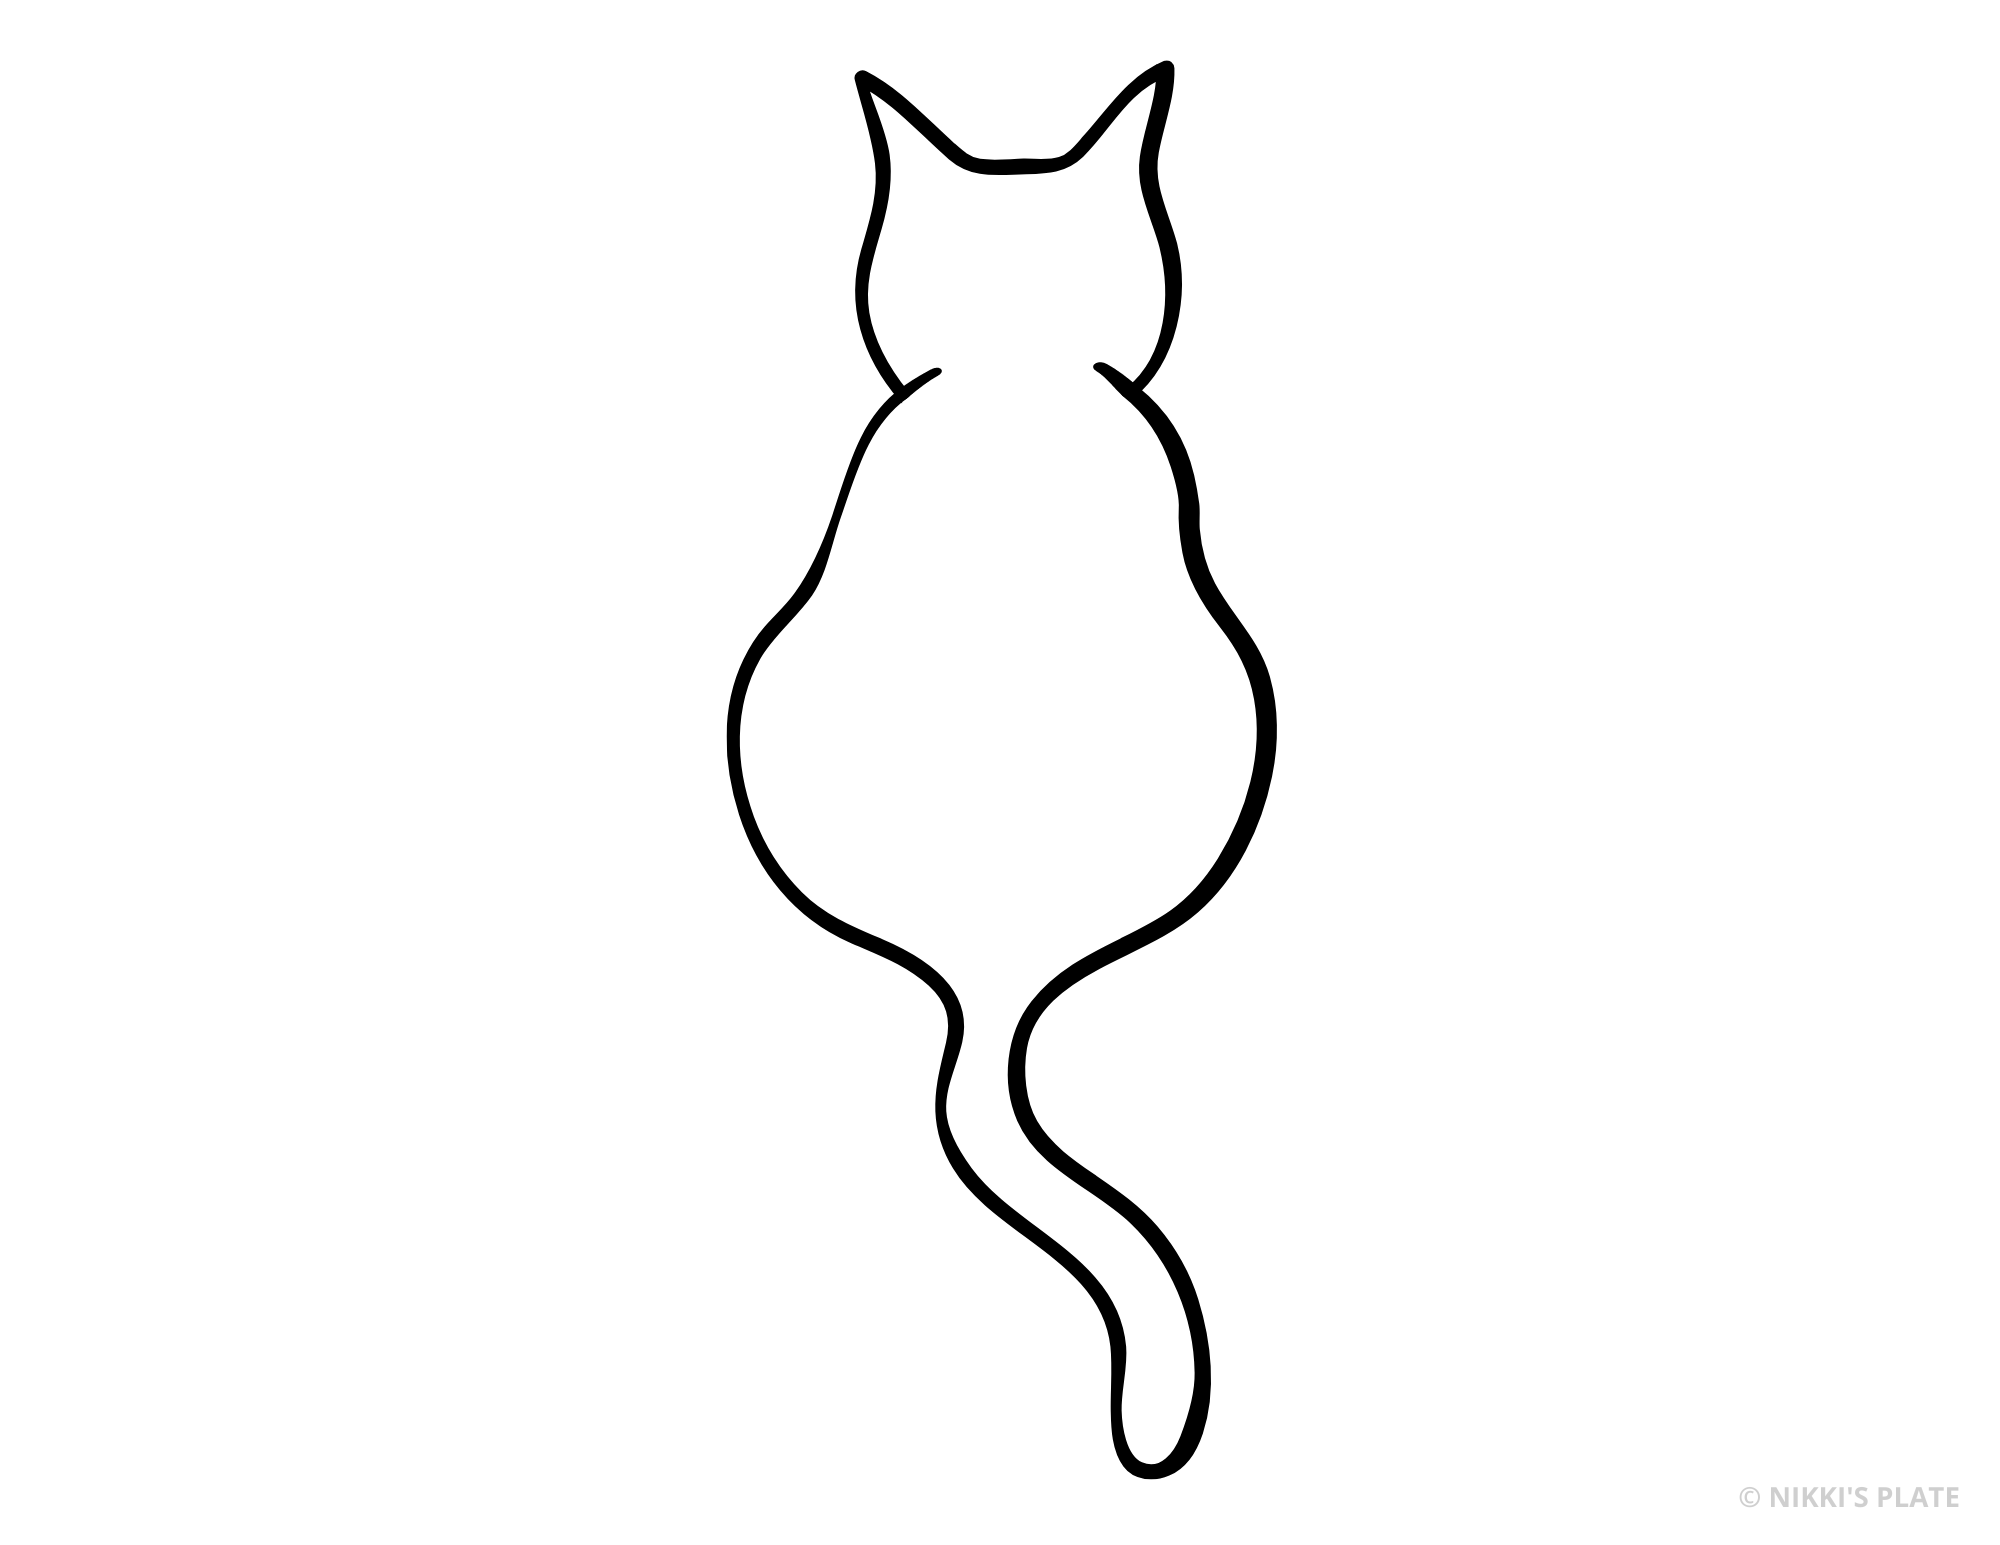 20 Cat Pumpkin Carving Patterns (FREE PRINTABLE); looking for cat pumpkin carving ideas? Look no further with these free cat pumpkin carving stencils! Download and print!